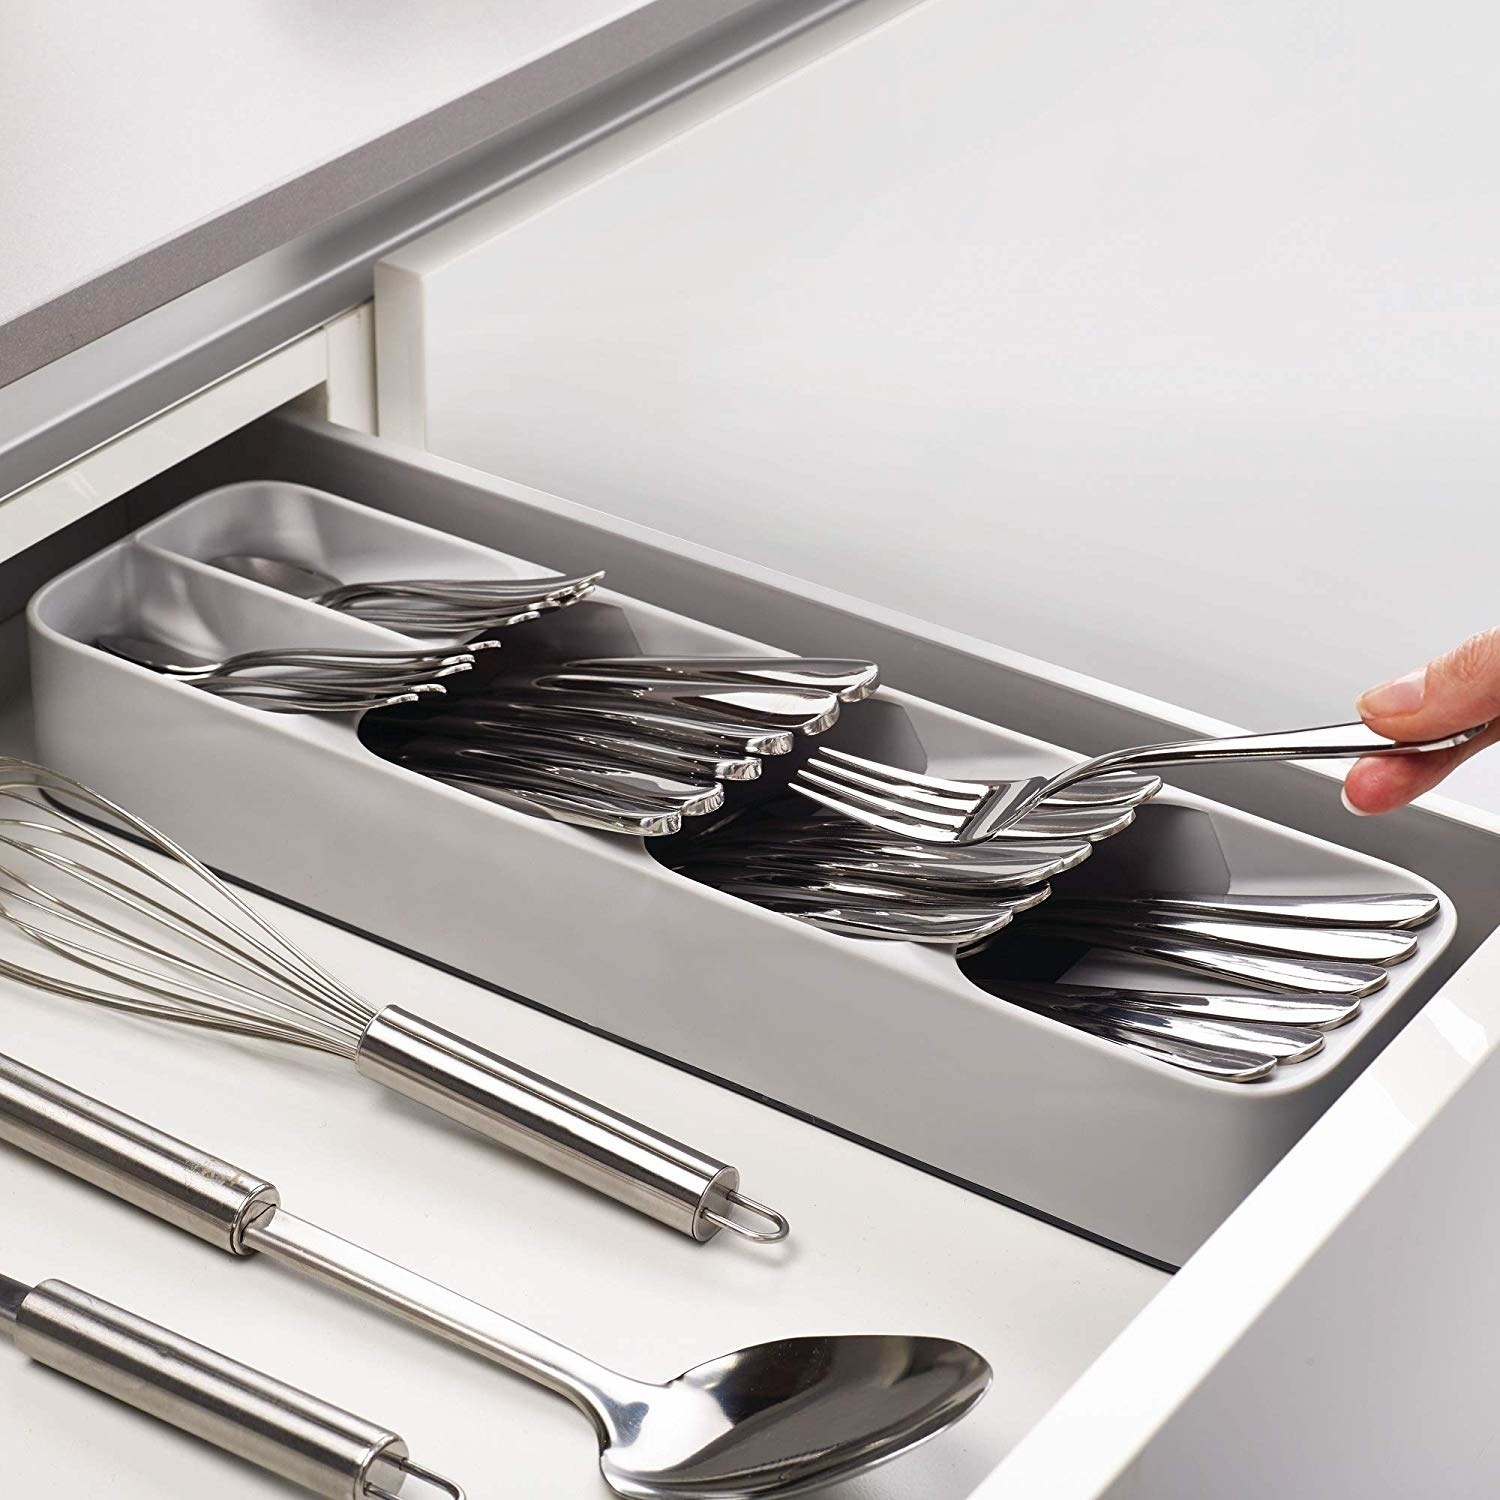 The deep organizer, which has three main slots for forks, knives, and spoons — each slot stacked on the previous one — and two shallower half-slots for smaller utensils 